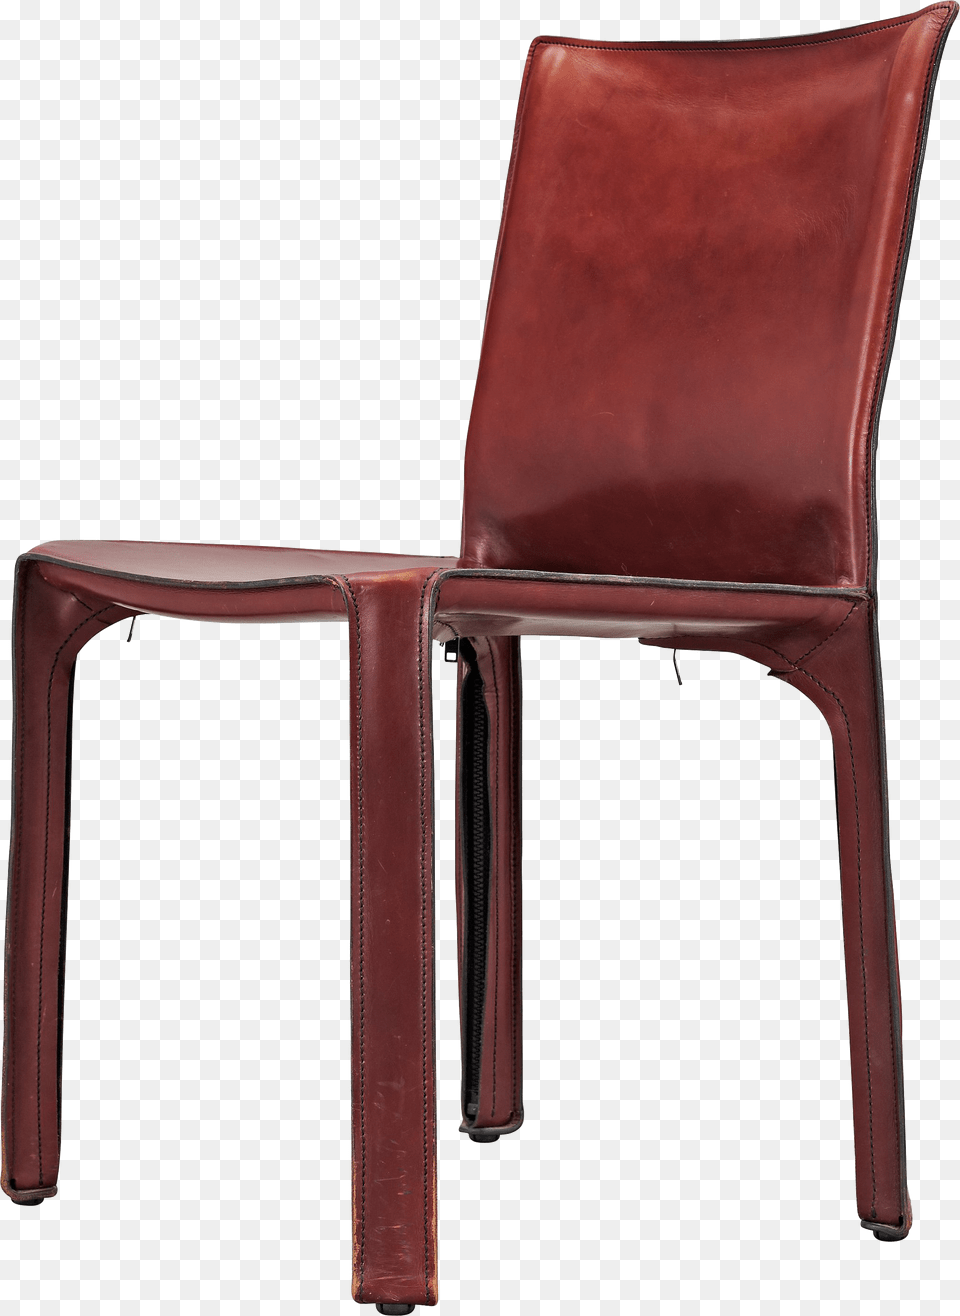 Image, Chair, Furniture, Armchair Png